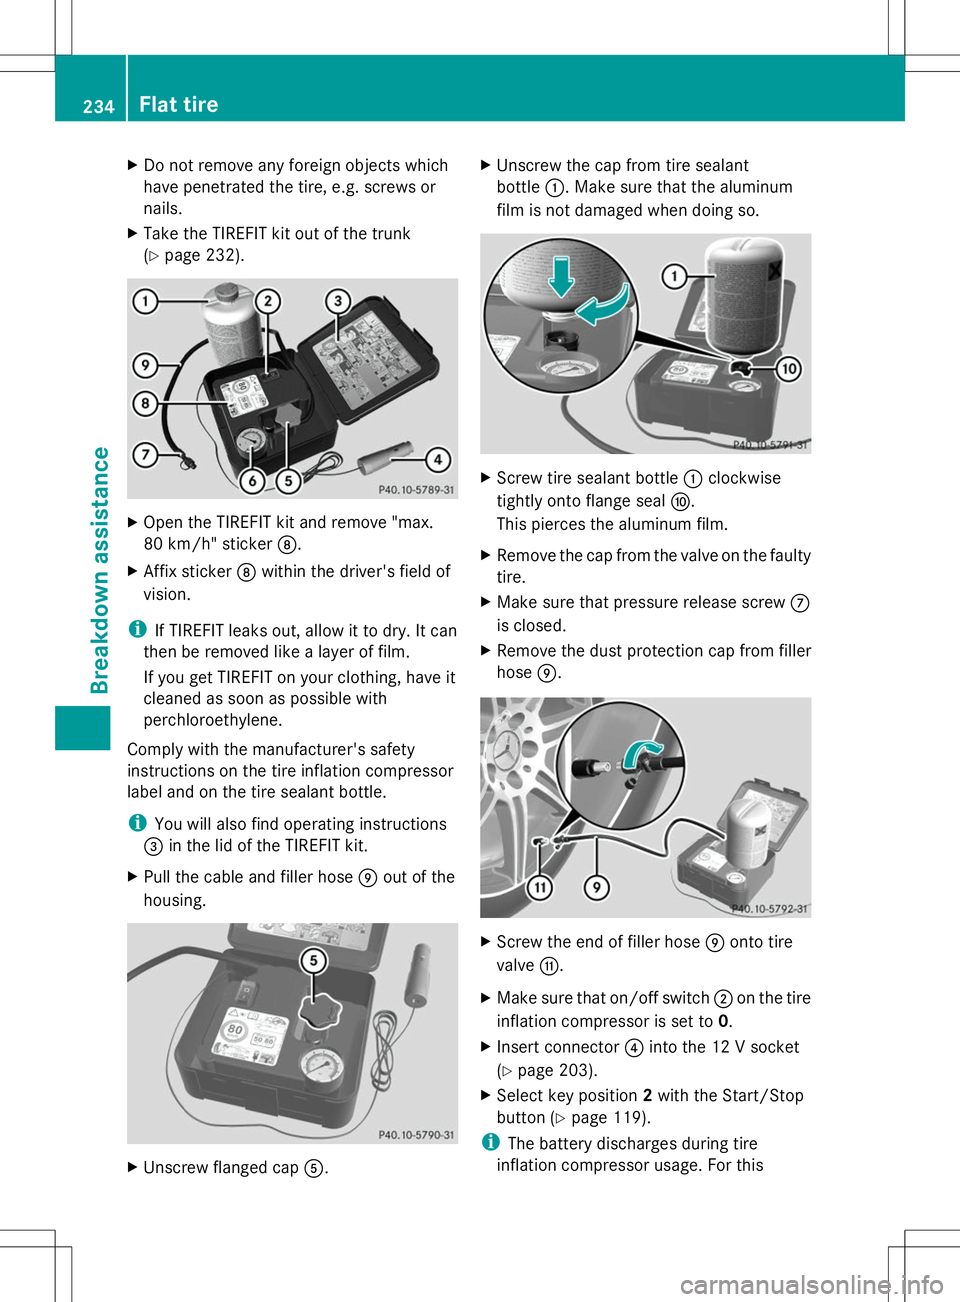 MERCEDES-BENZ SLS AMG COUPE 2014  Owners Manual X
Do not remove any foreign objects which
have penetrated the tire, e.g. screws or
nails.
X Take the TIREFIT kit out of the trunk
(Y page 232). X
Open the TIREFIT kit and remove "max.
80 km/h"